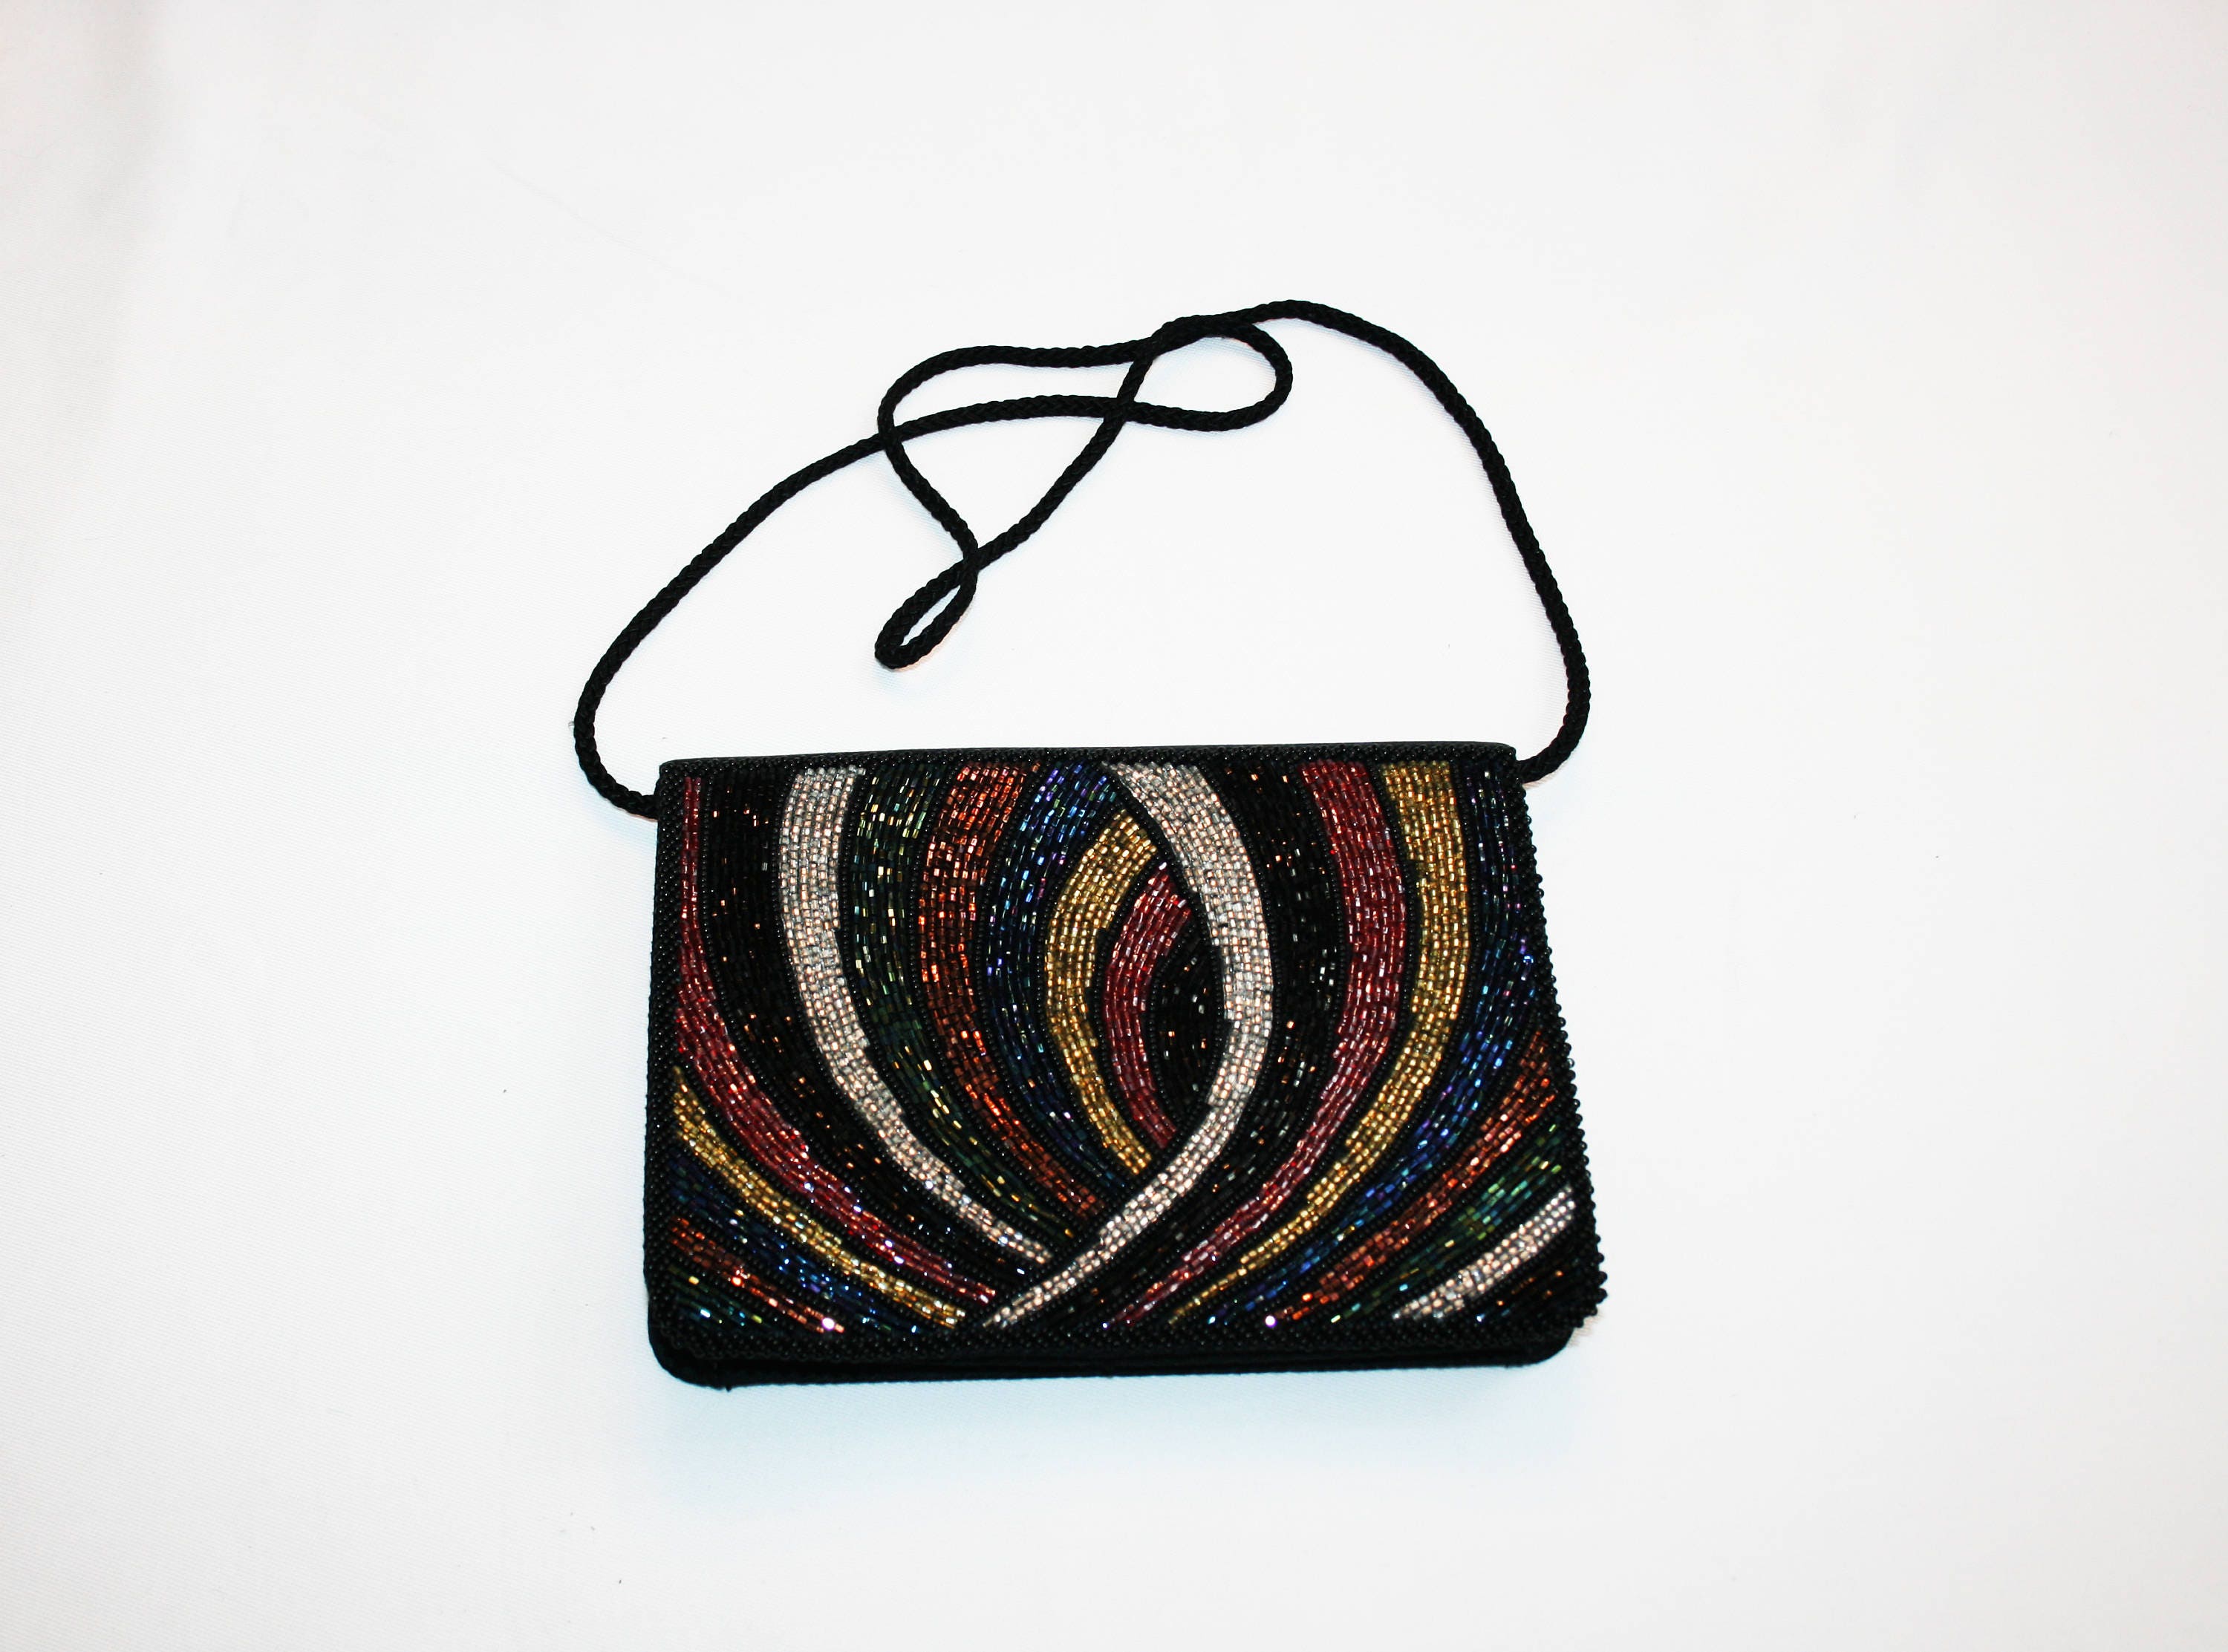 Vintage Black Satin Beaded Evening Bag with Button Snap Clasp, clutch ...